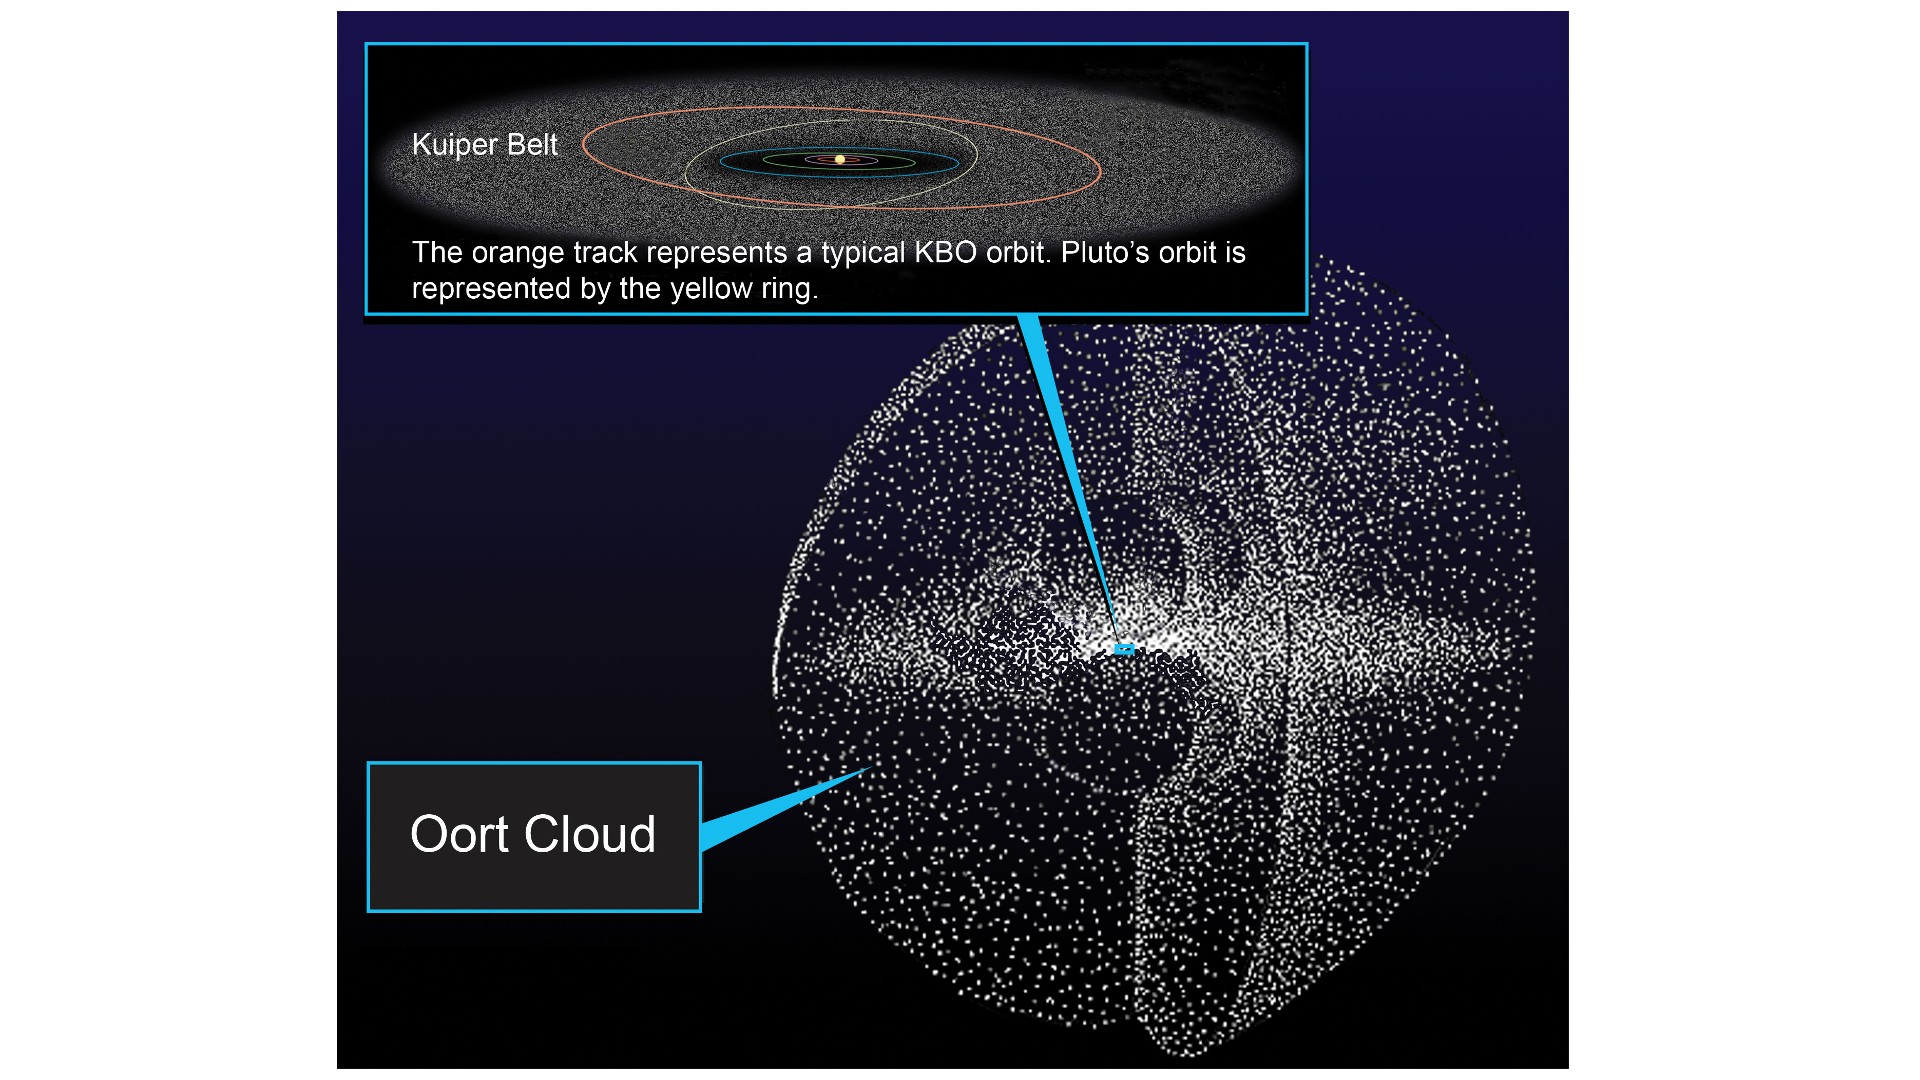 An illustration of the Kuiper Belt and Oort Cloud in relation to our solar system. Dec 11, 2009. NASA